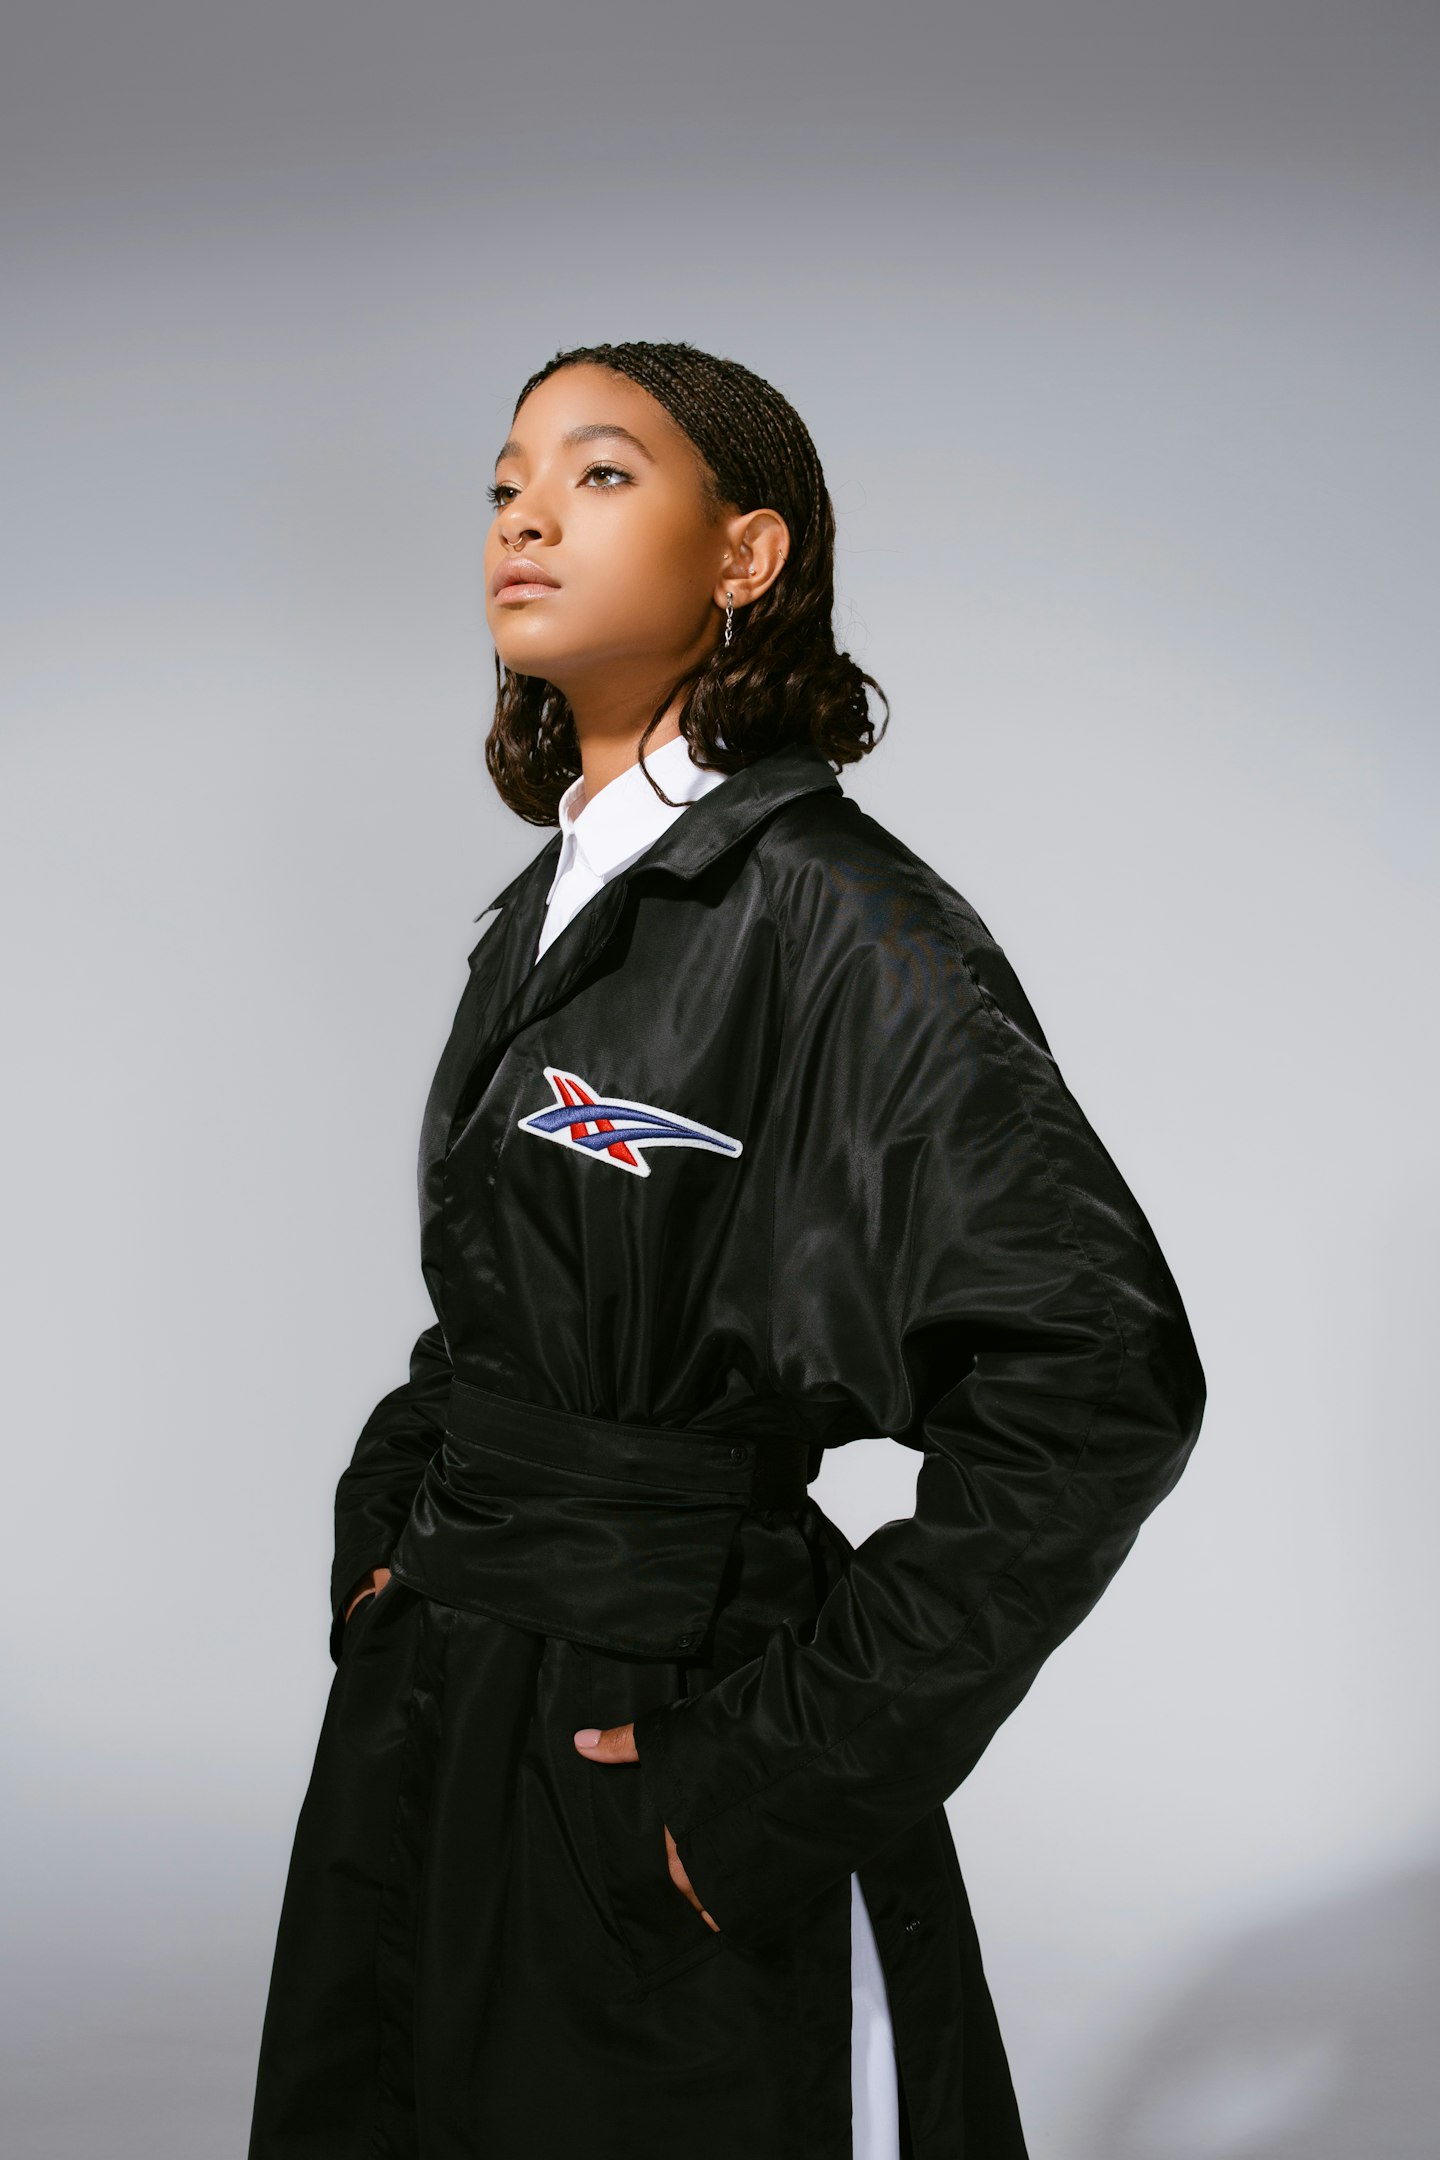 Willow Smith wearing black coat from Onitsuka Tiger